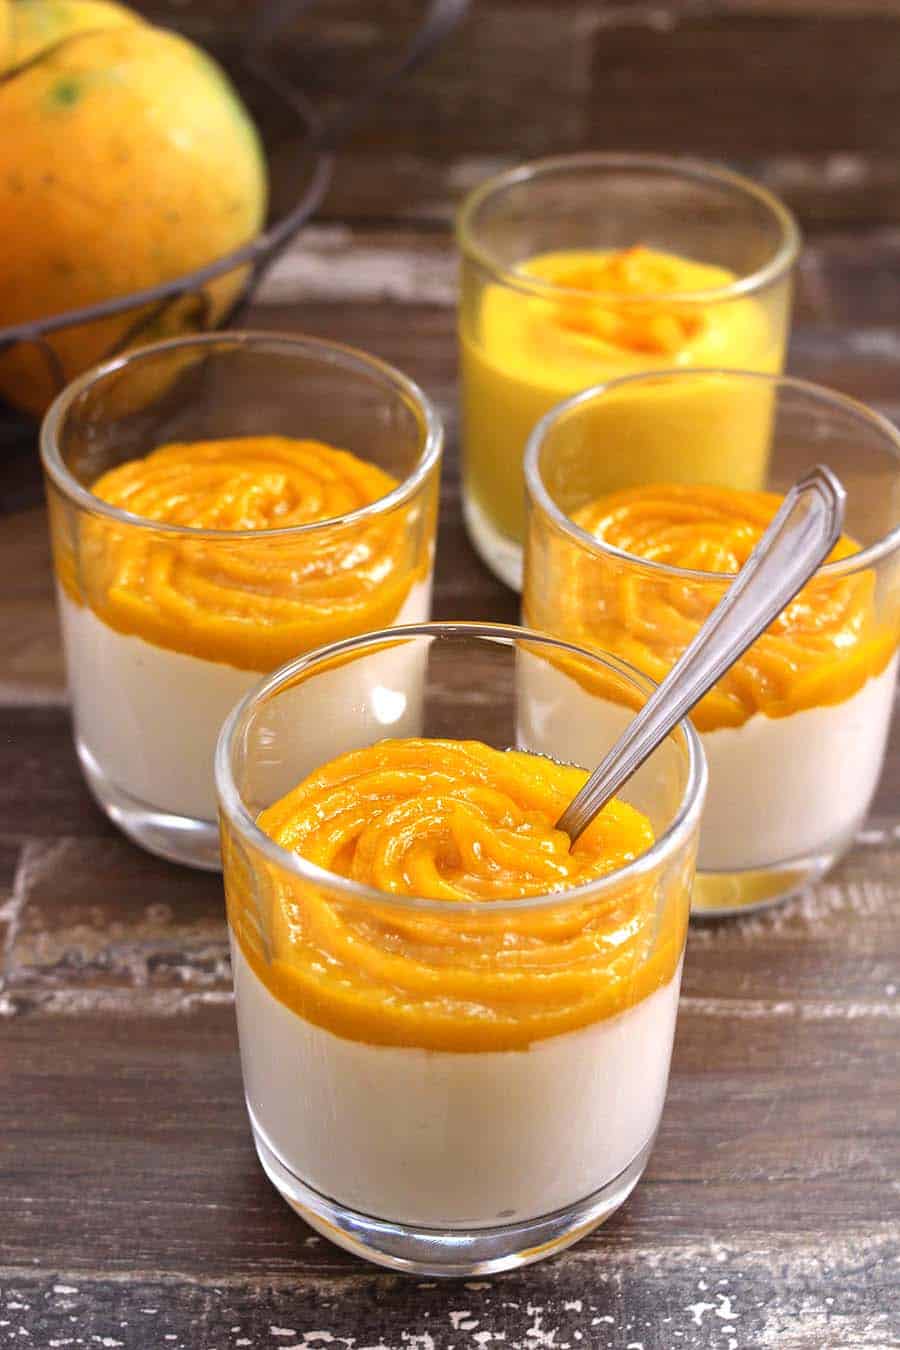 Easy Mango White Chocolate Mousse or Mousse Au Chocolat Mangue, Make ahead dessert recipe for parties, get together, romantic date, july 4th, memorial day, Easter, thanksgiving, Christmas, mango recipes, chocolate recipes, summer food recipe, no bake desserts, eggless sweets and desserts, pudding recipes, cream cheese, keto mousse